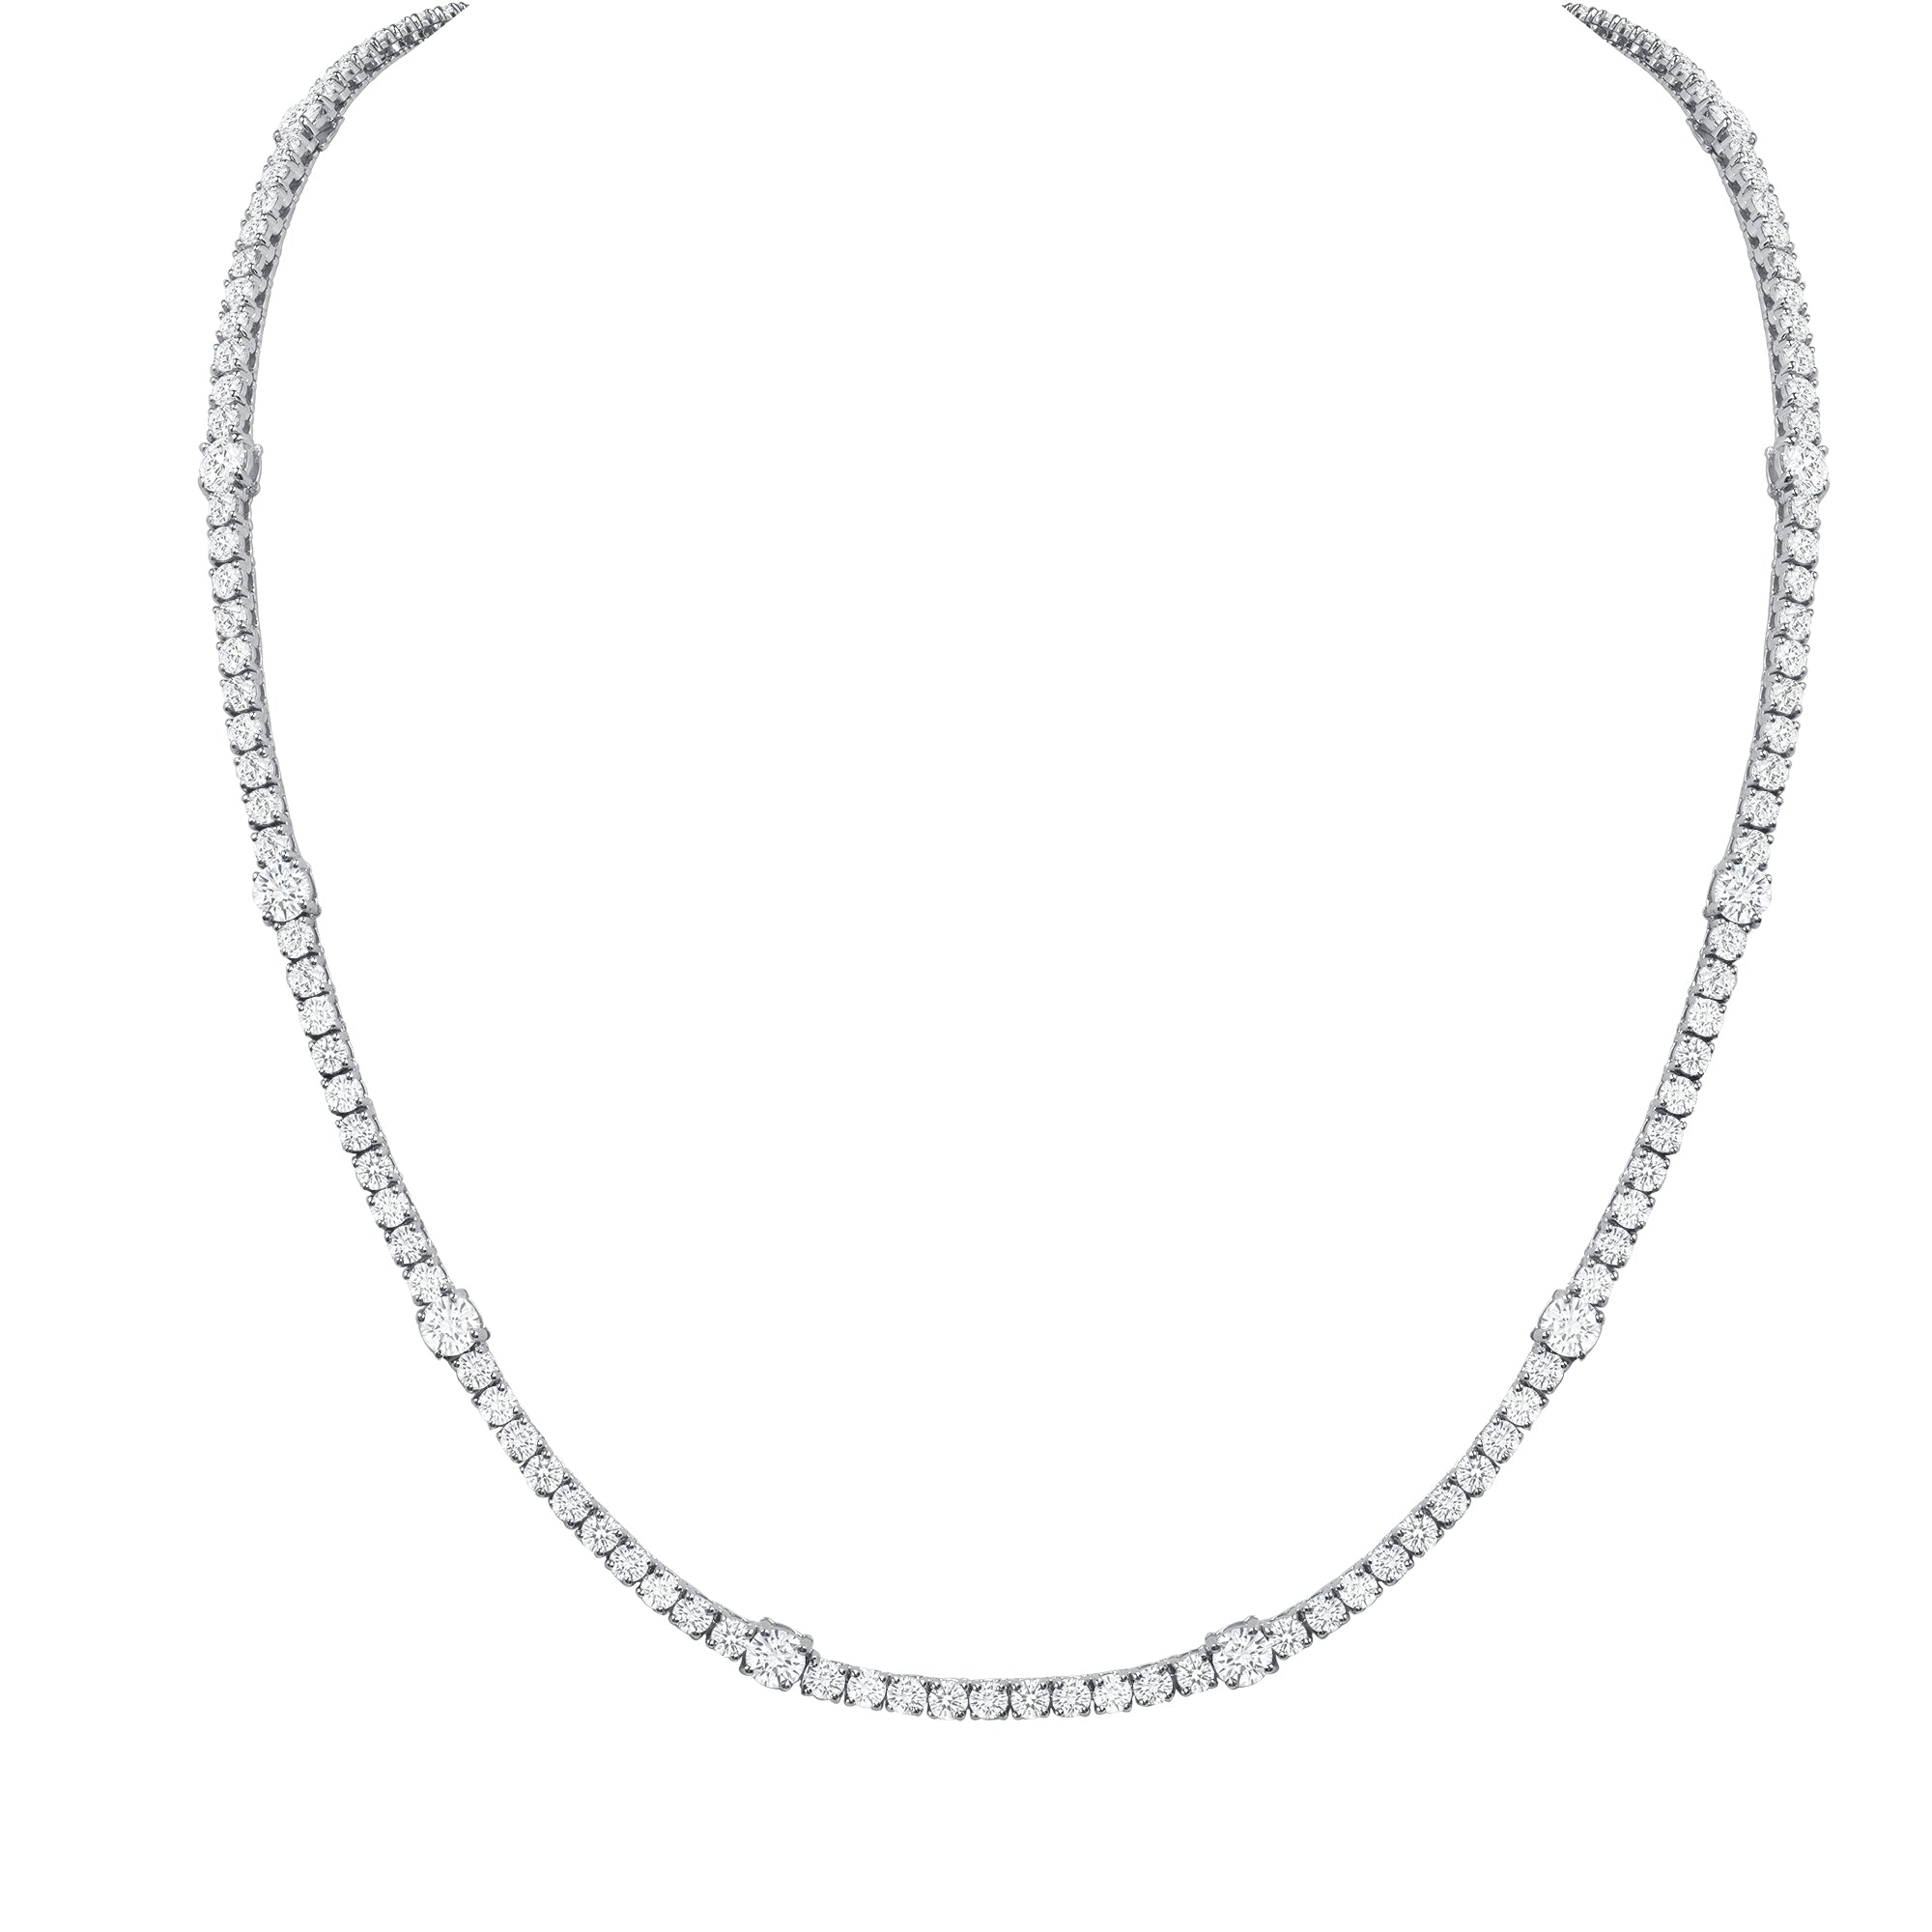 11.17ct Round Brilliant Diamond Stationed Tennis Necklace in 18K White Gold